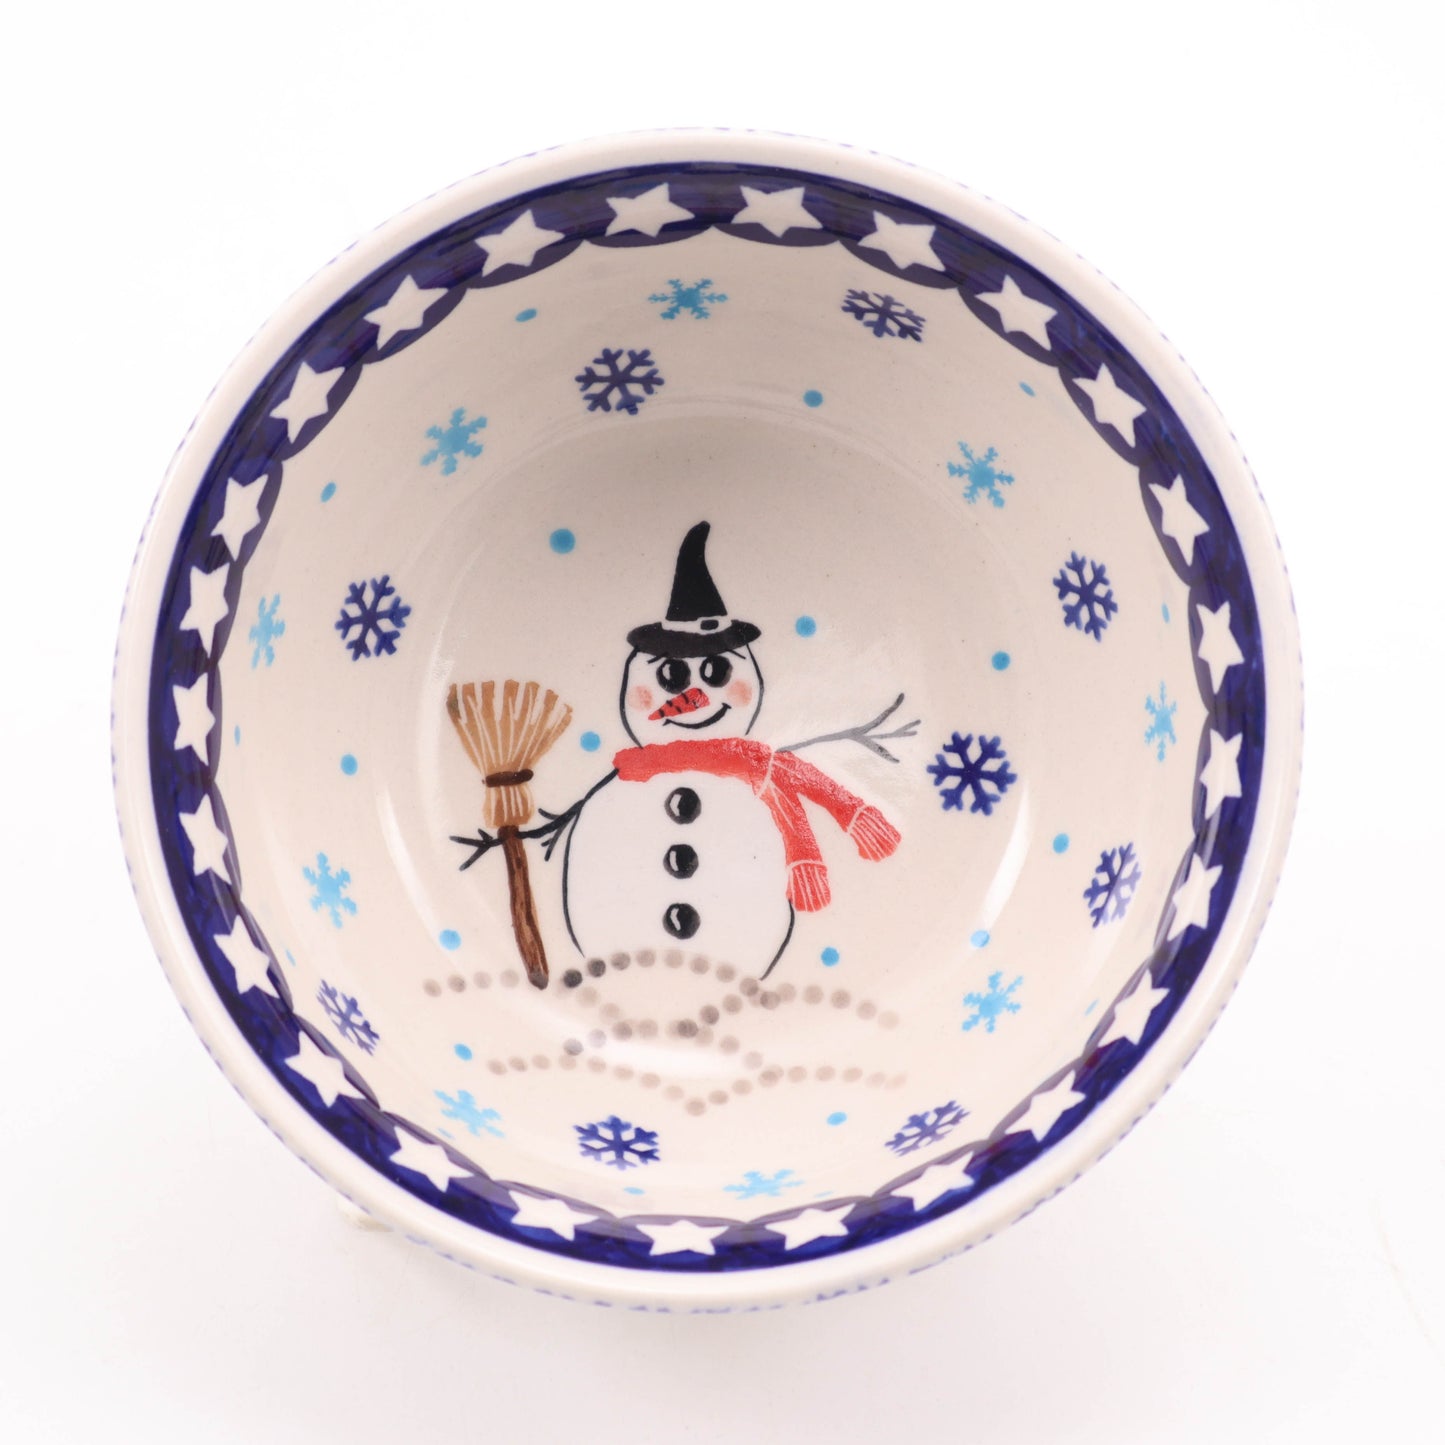 6" Cereal Bowl. Pattern: Snowman